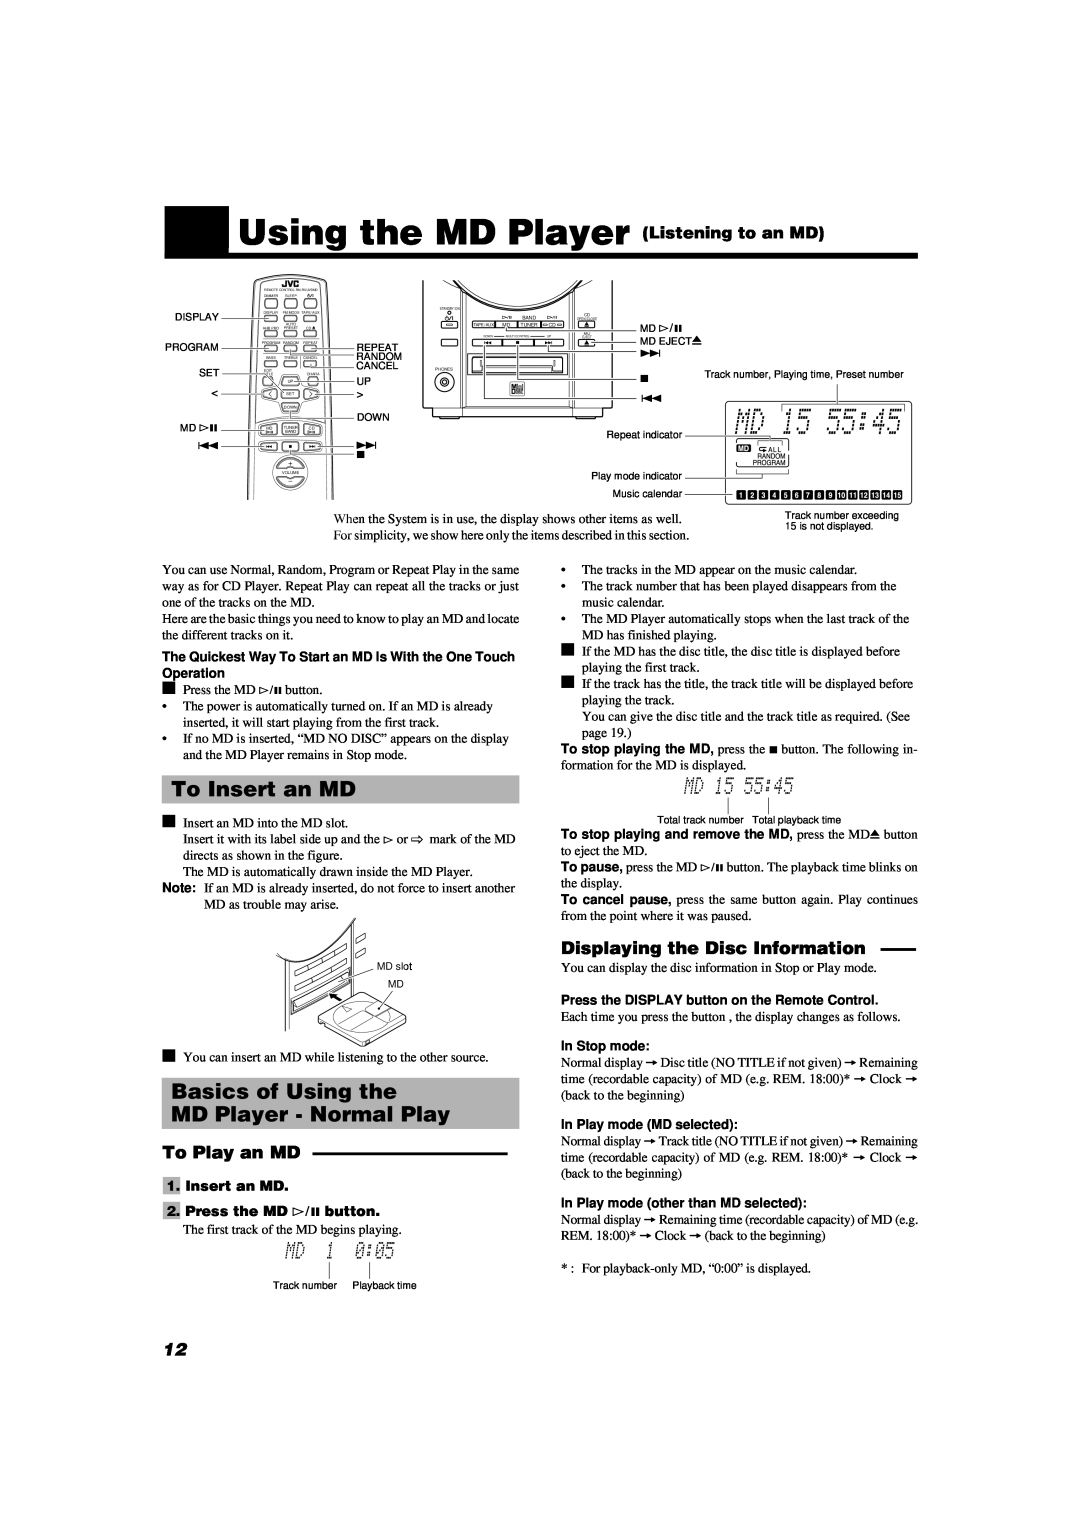 JVC UX-V9MD manual Using the MD Player Listening to an MD, To Insert an MD, Basics of Using the MD Player - Normal Play 